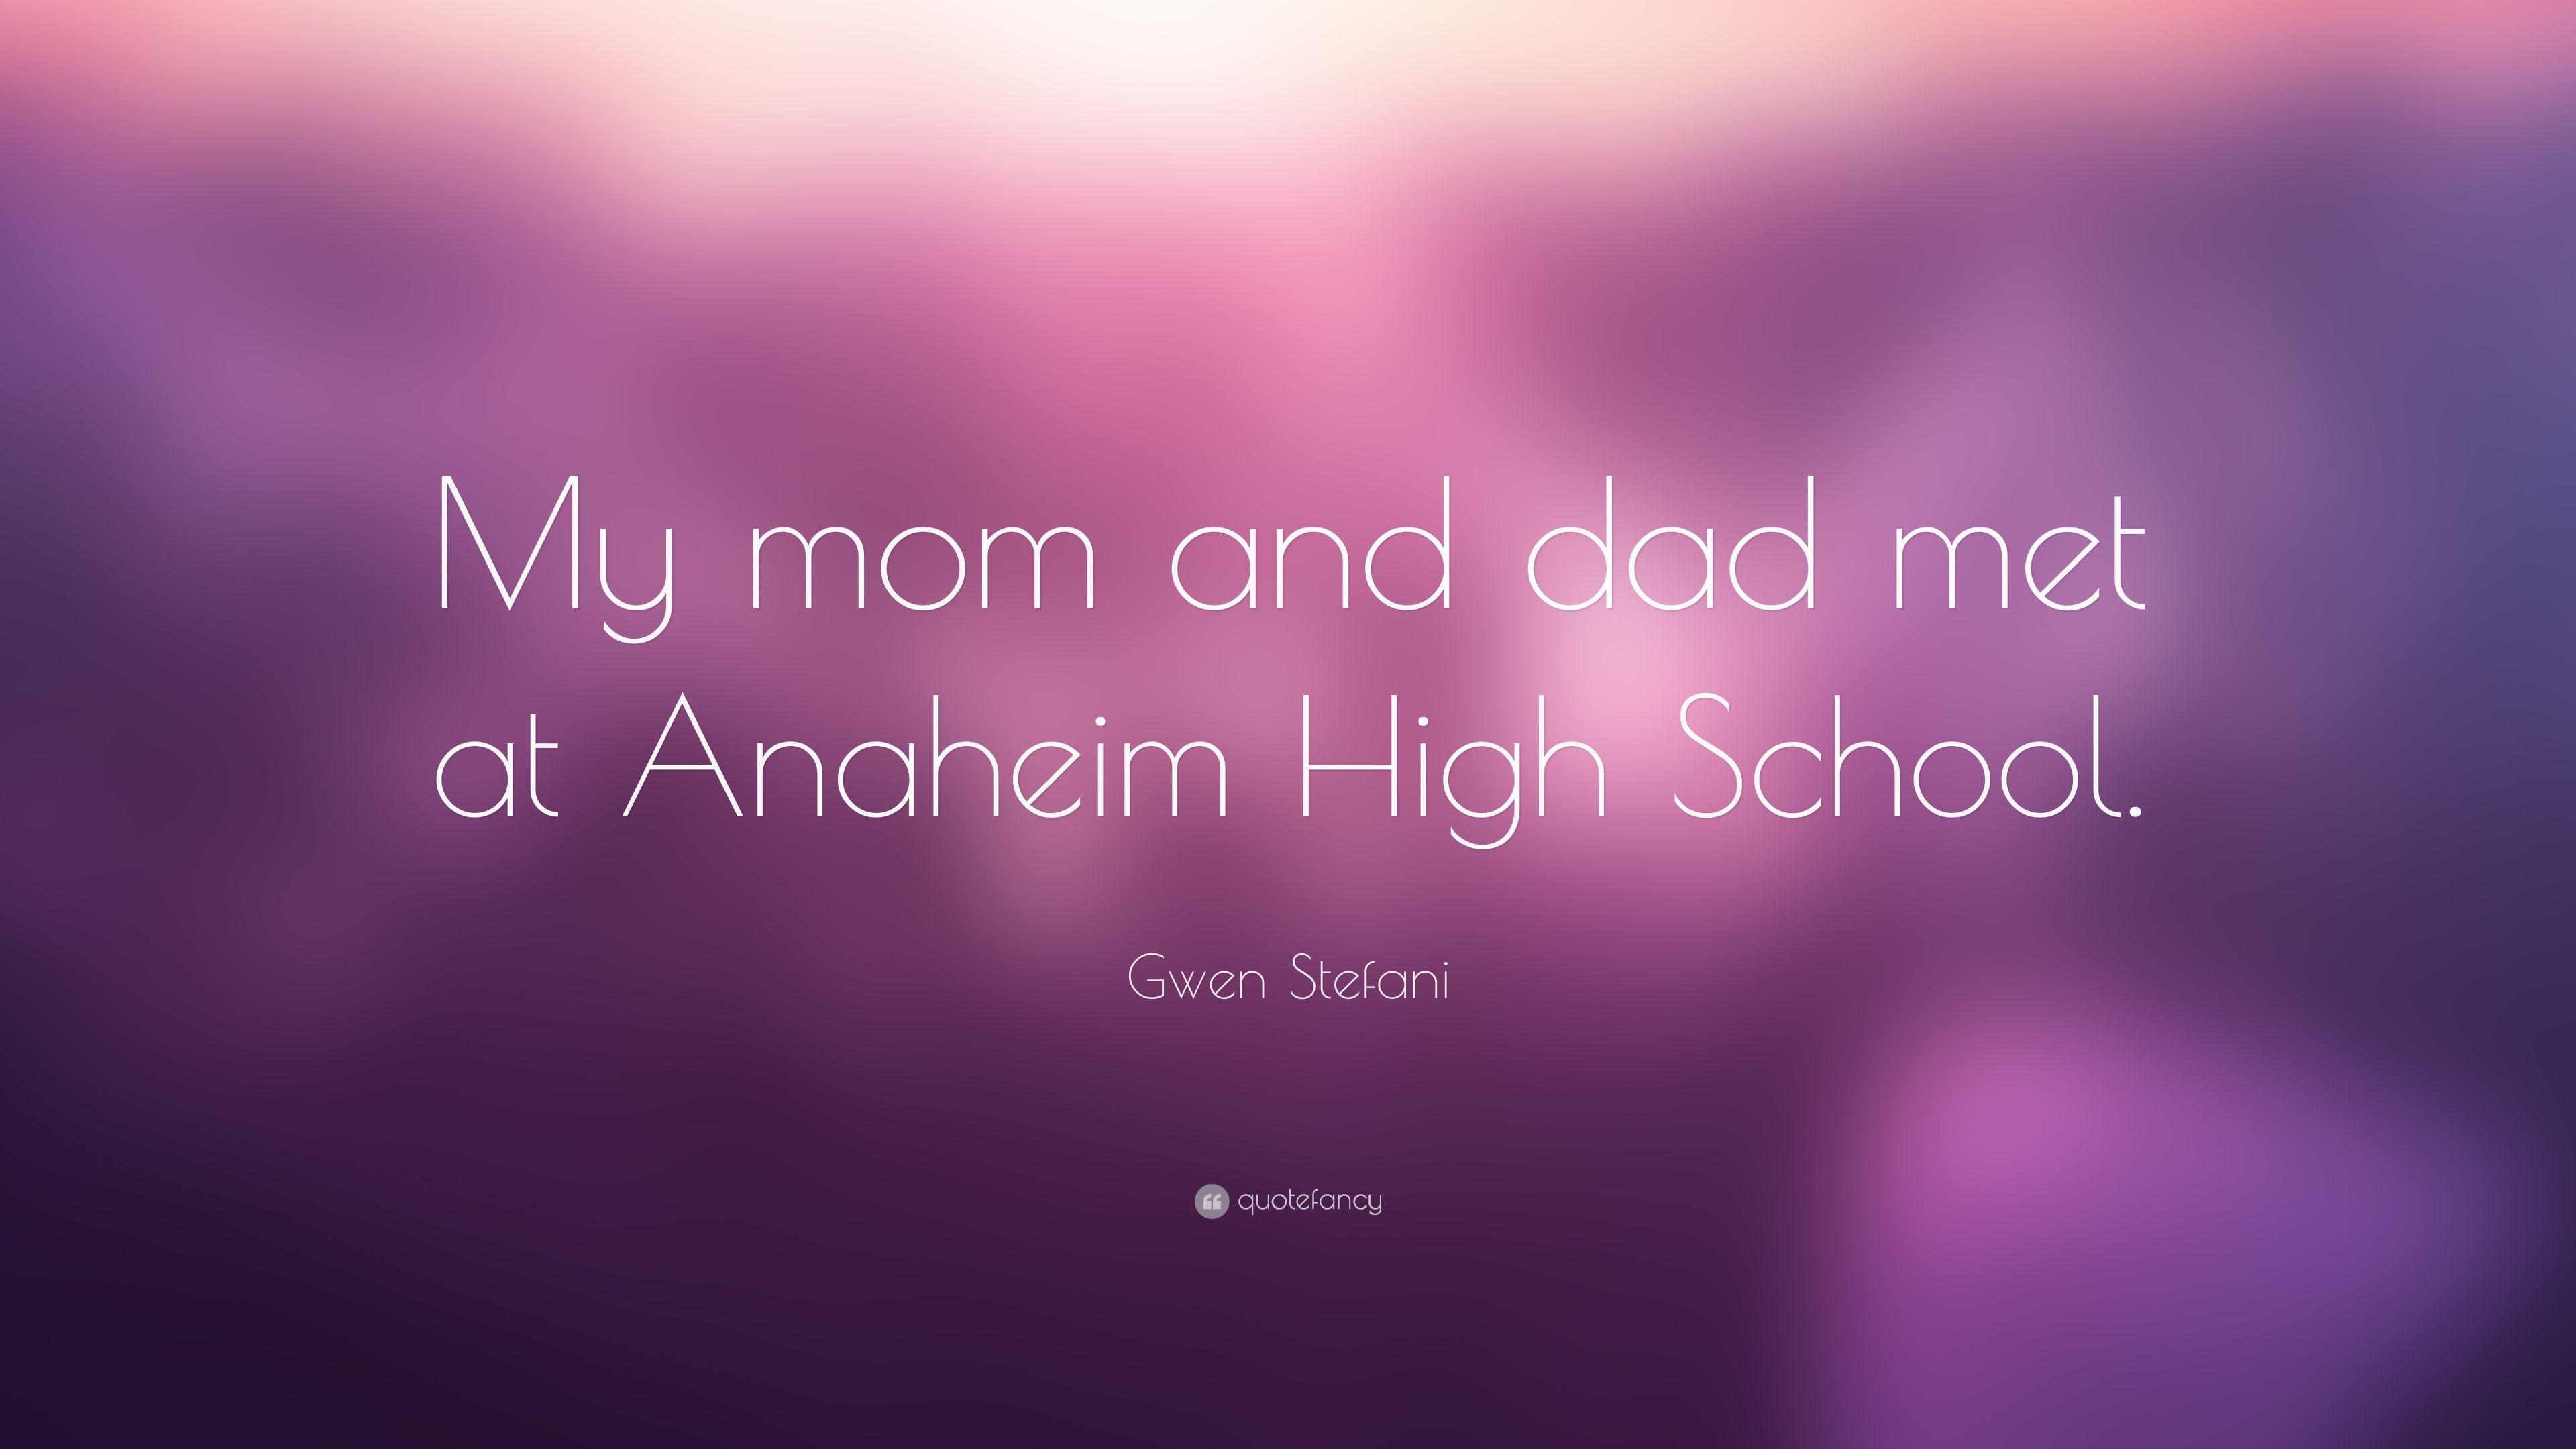 Gwen Stefani Quote: “My mom and dad met at Anaheim High